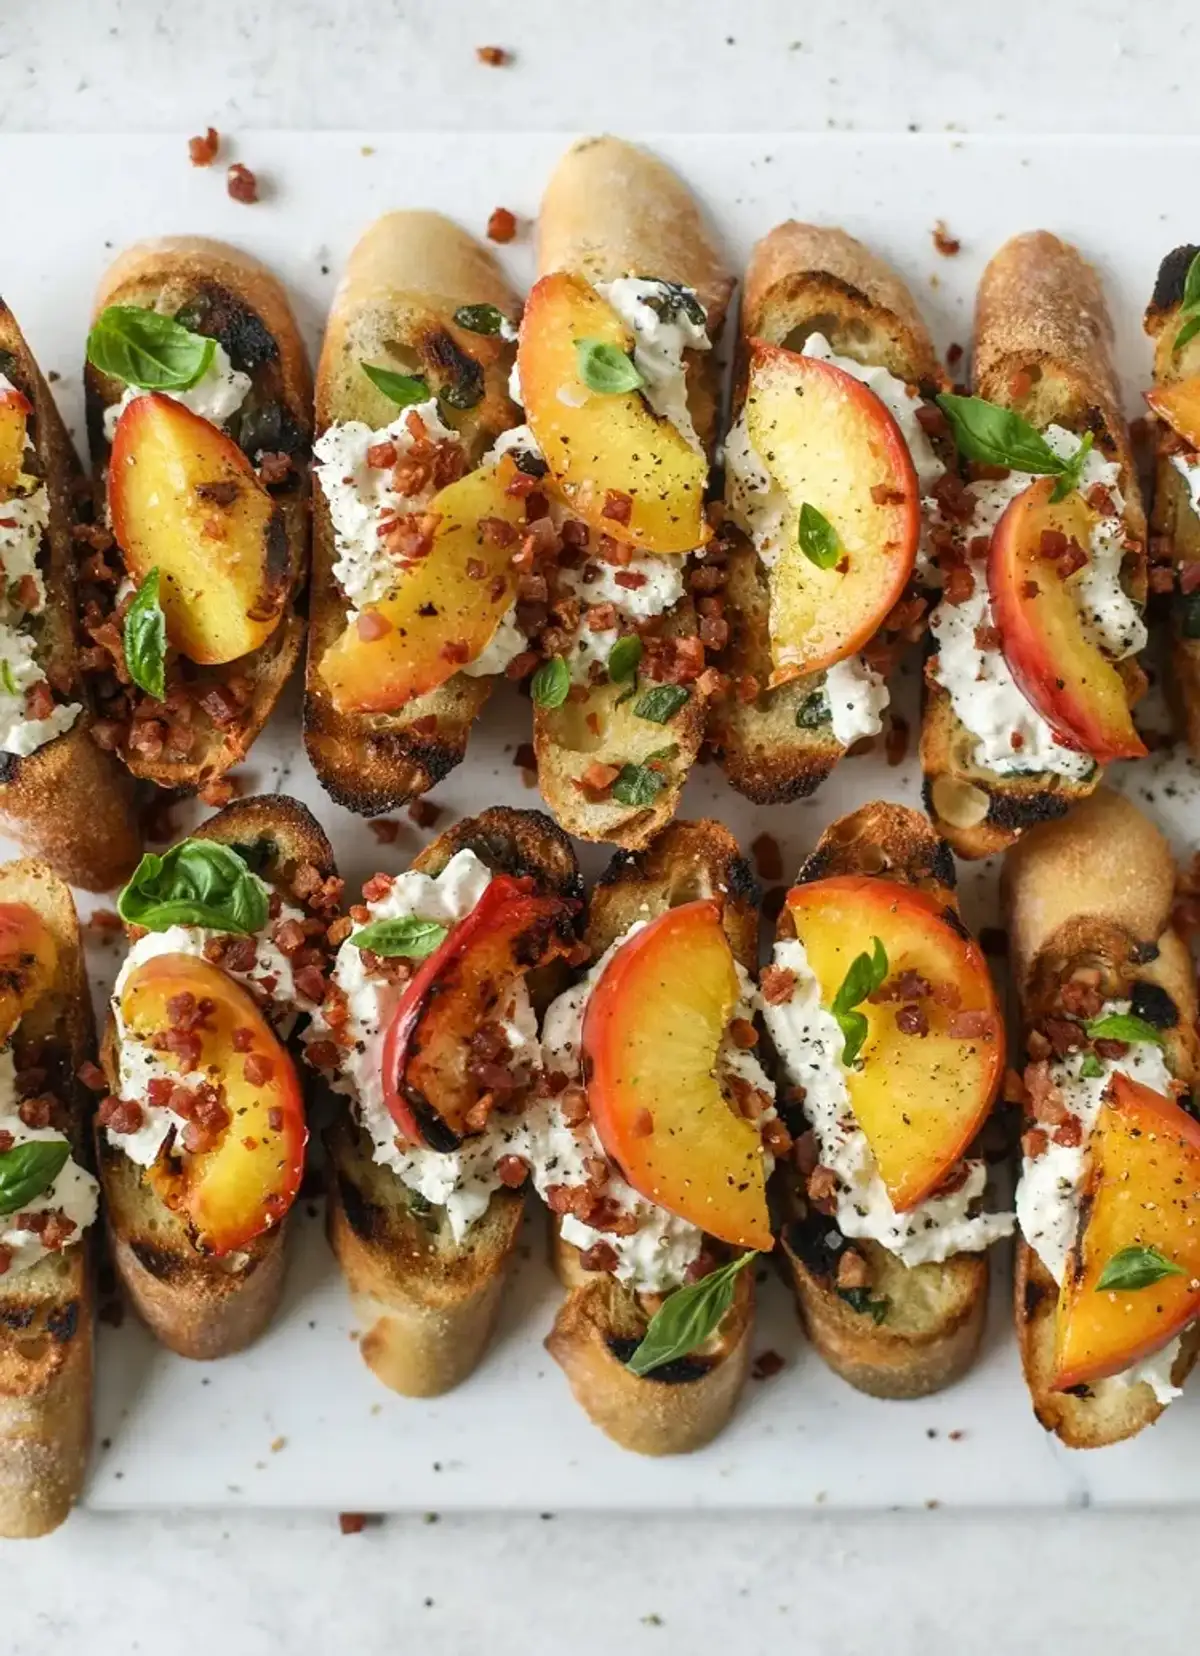 Shocking Bruschetta Recipes You Need To Try Now!